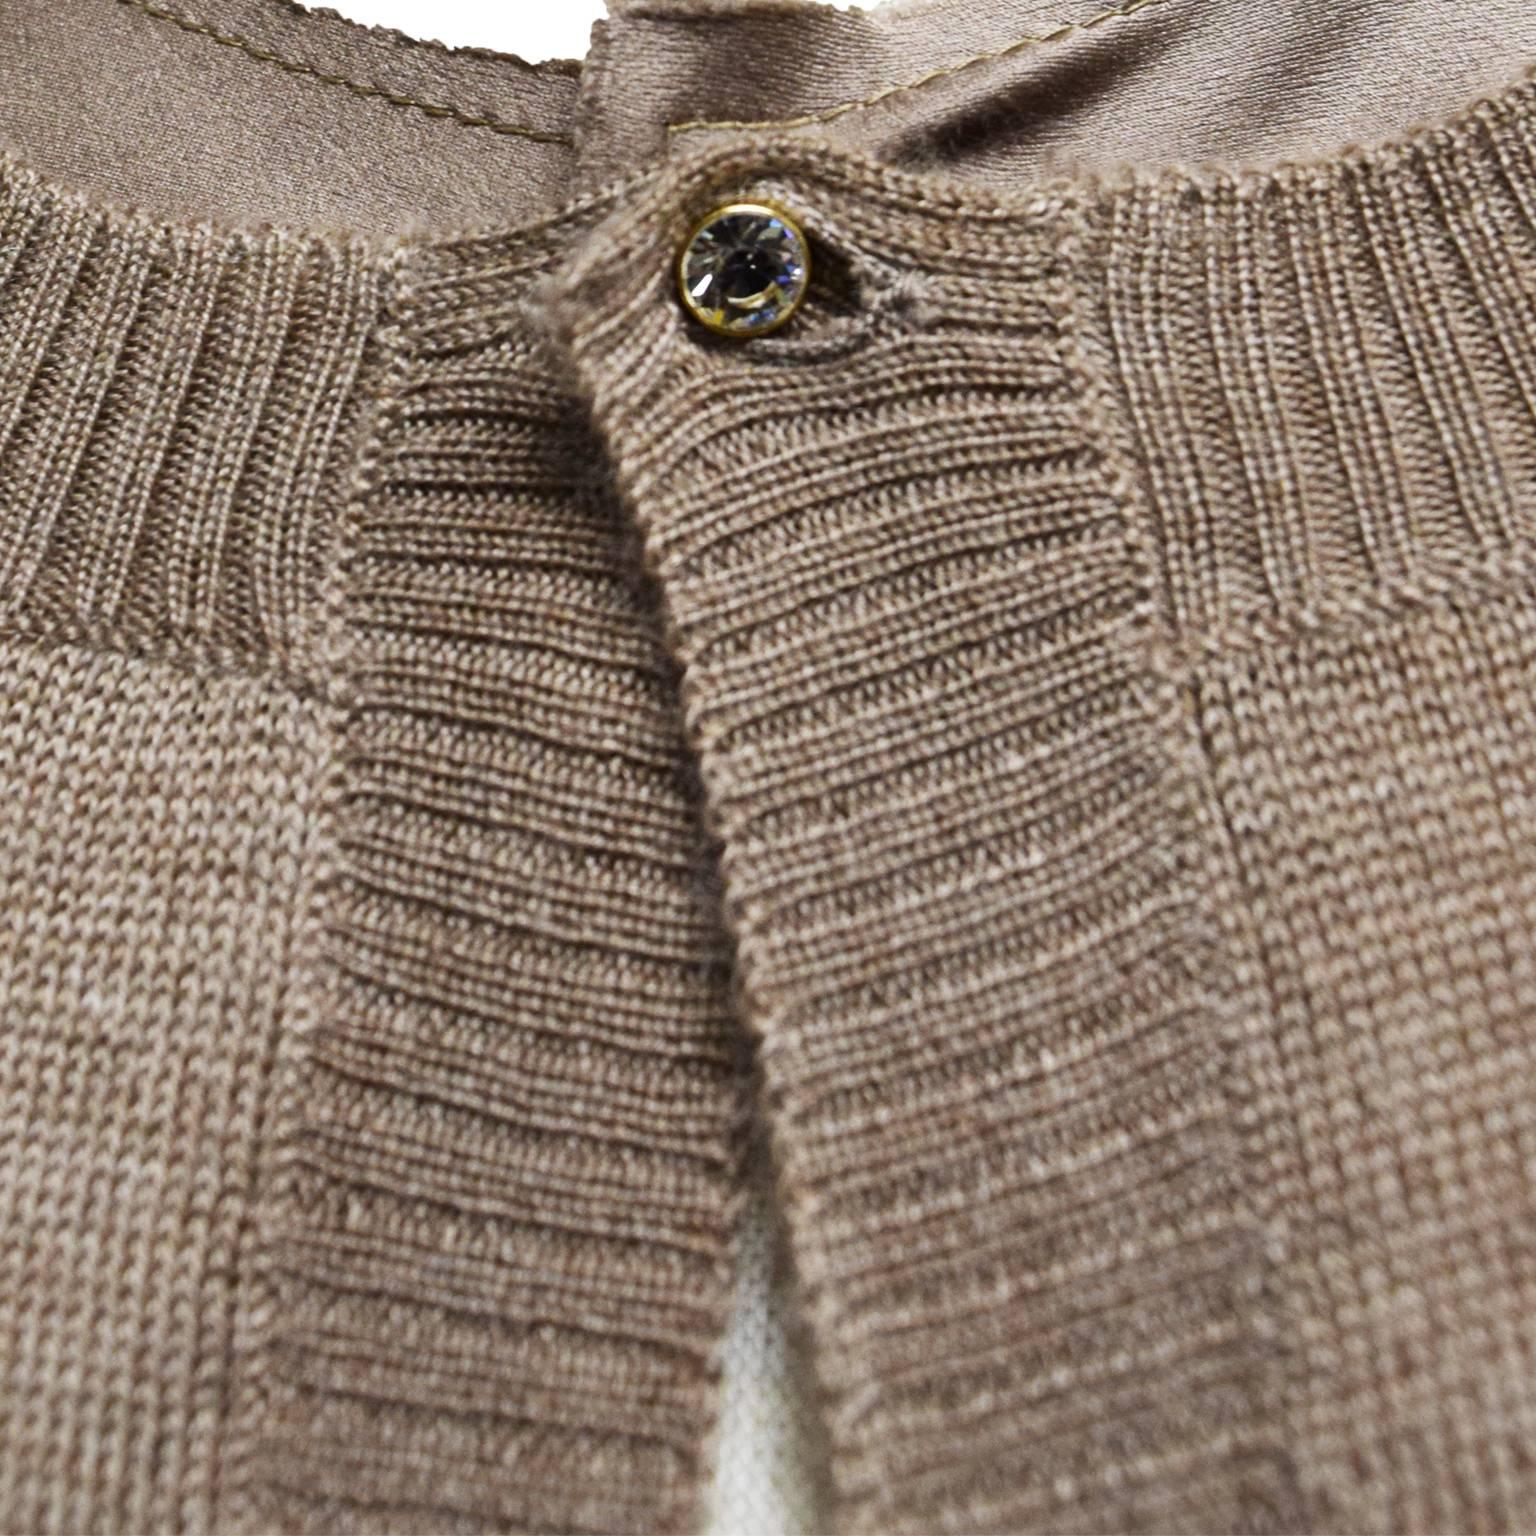 This beautiful sweater and vest duo is a one of a kind. This ensemble is made of silk and cashmere. The button is made from a Swarovski crystal.  